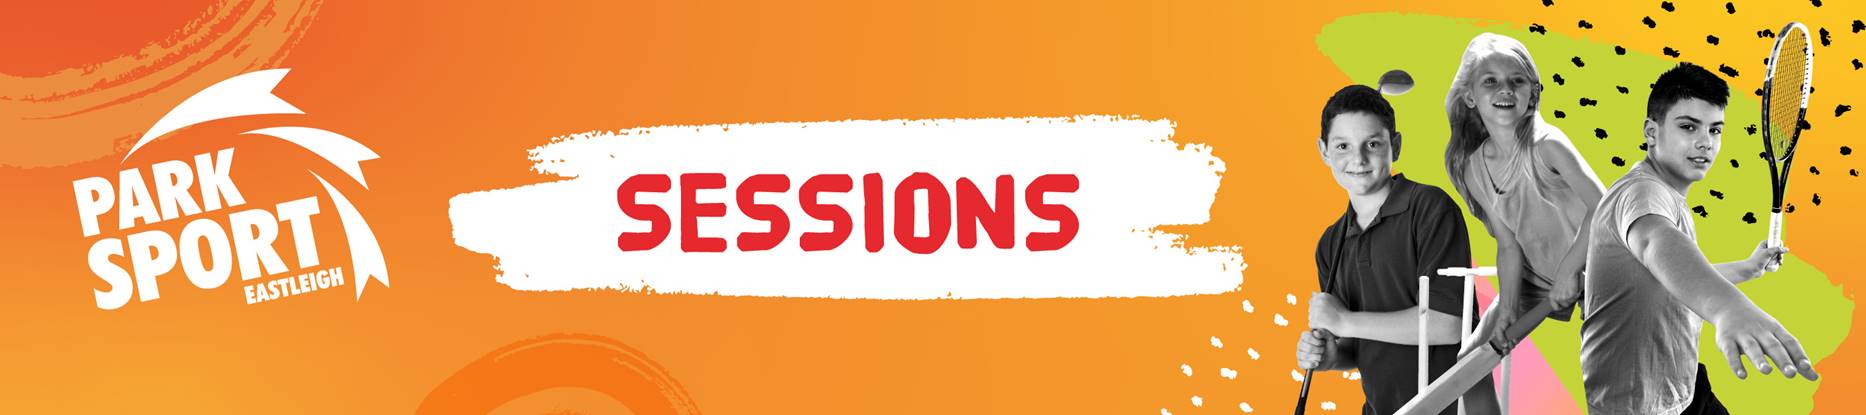 Sessions banner